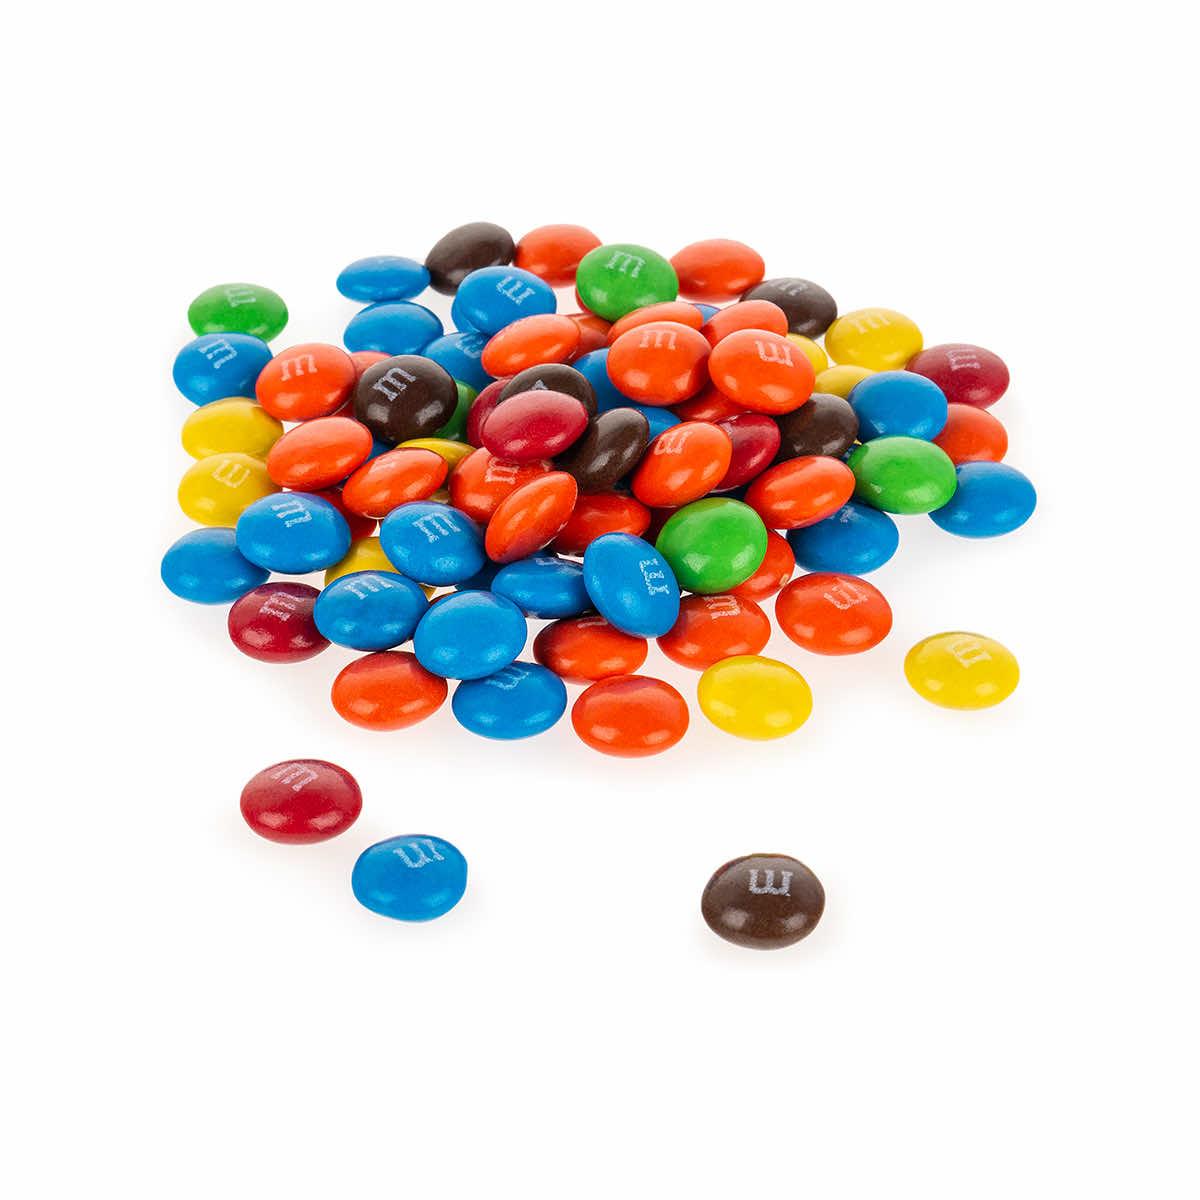 Mars Wrigley Confectionery rolls-out Crunchy Caramel M&M's